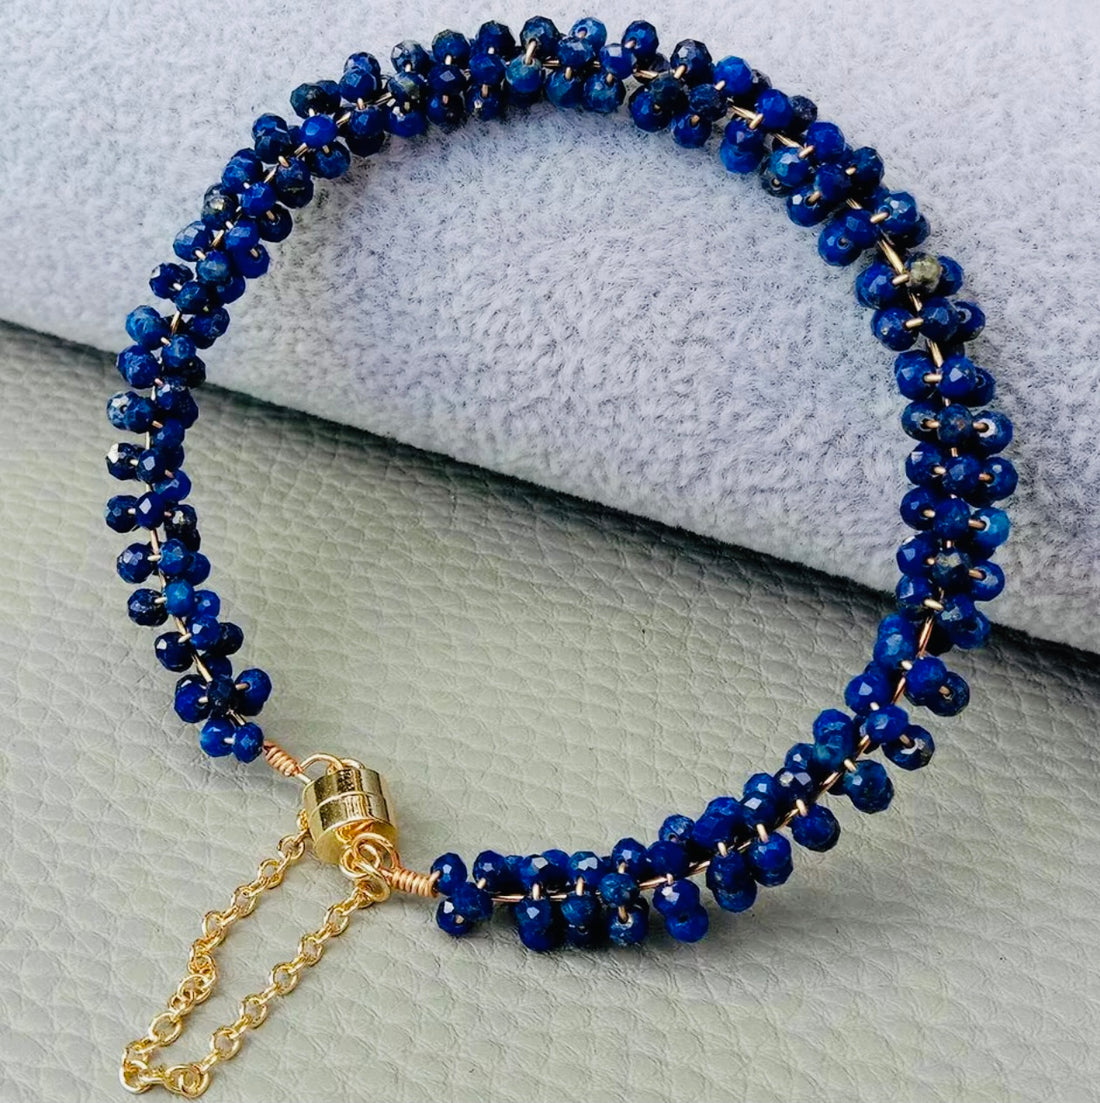 Lapis is a Timeless Gemstone